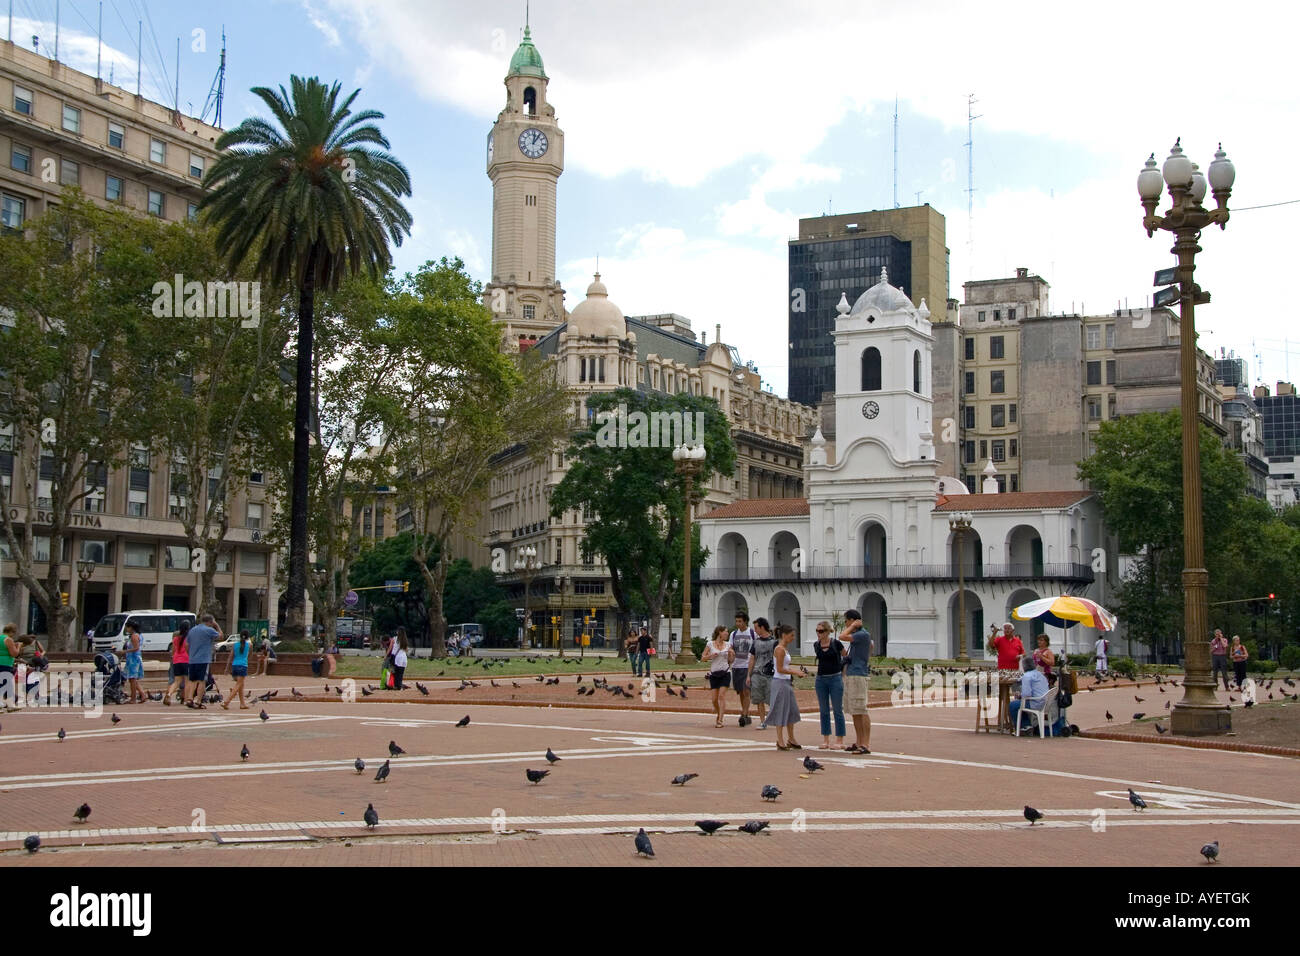 The Cabildo located in the Plaza de Mayo in Buenos Aires Argentina Stock Photo